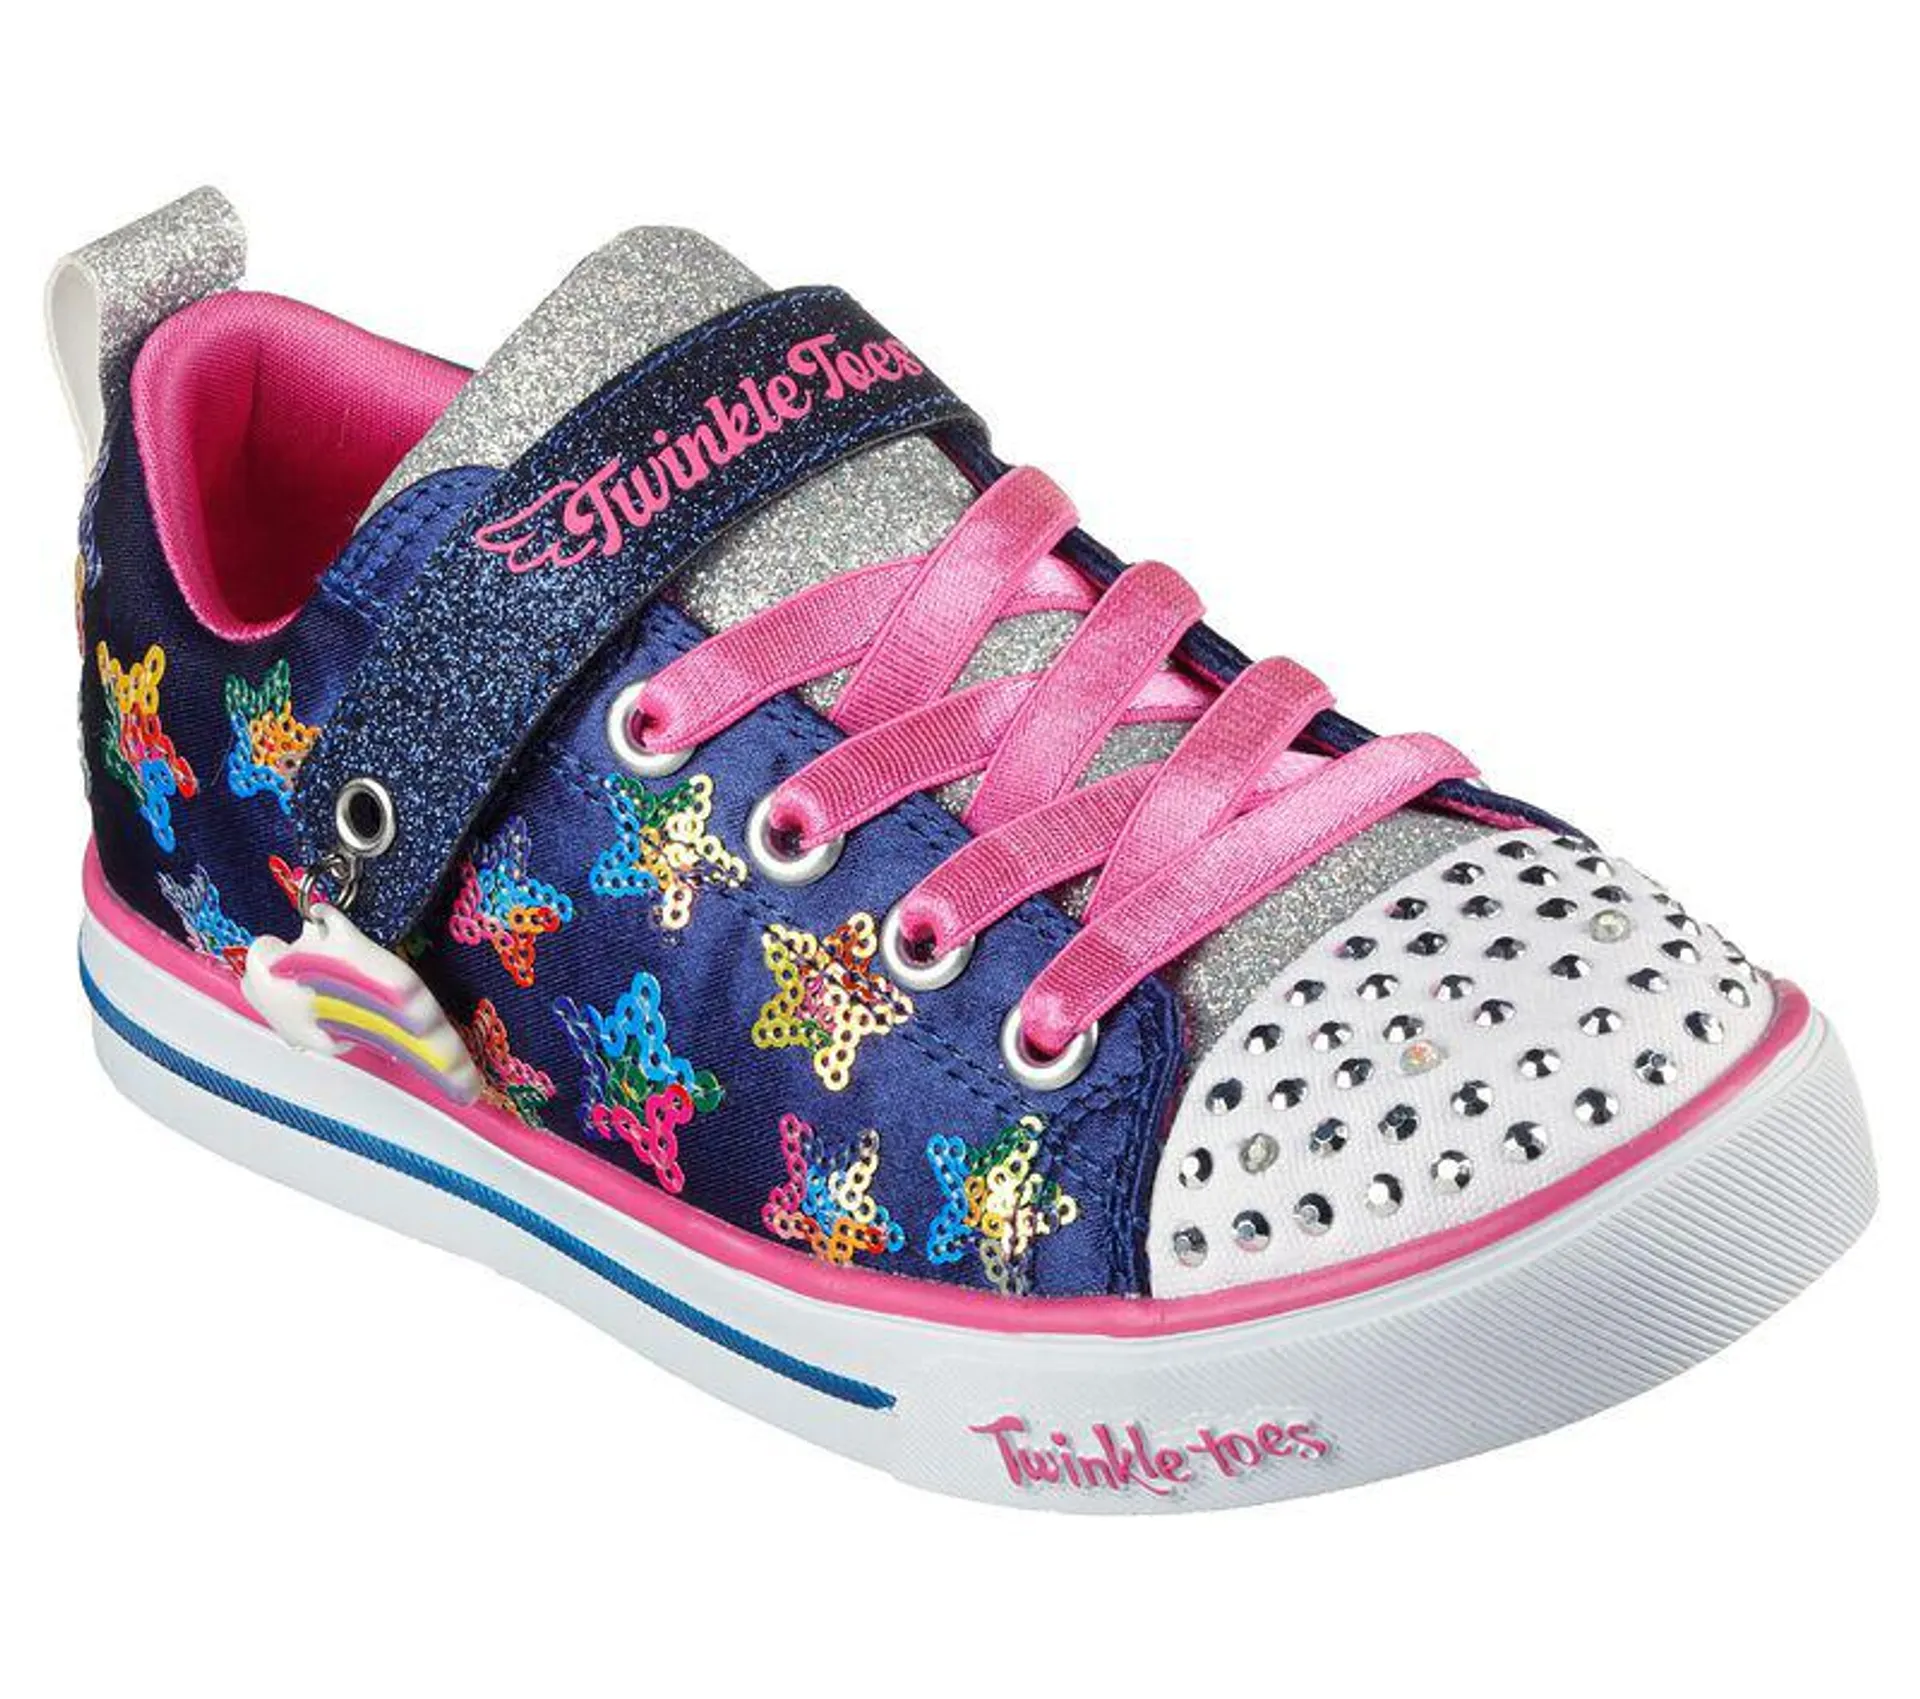 Twinkle Toes: Sparkle Lite - Starry Dreamy